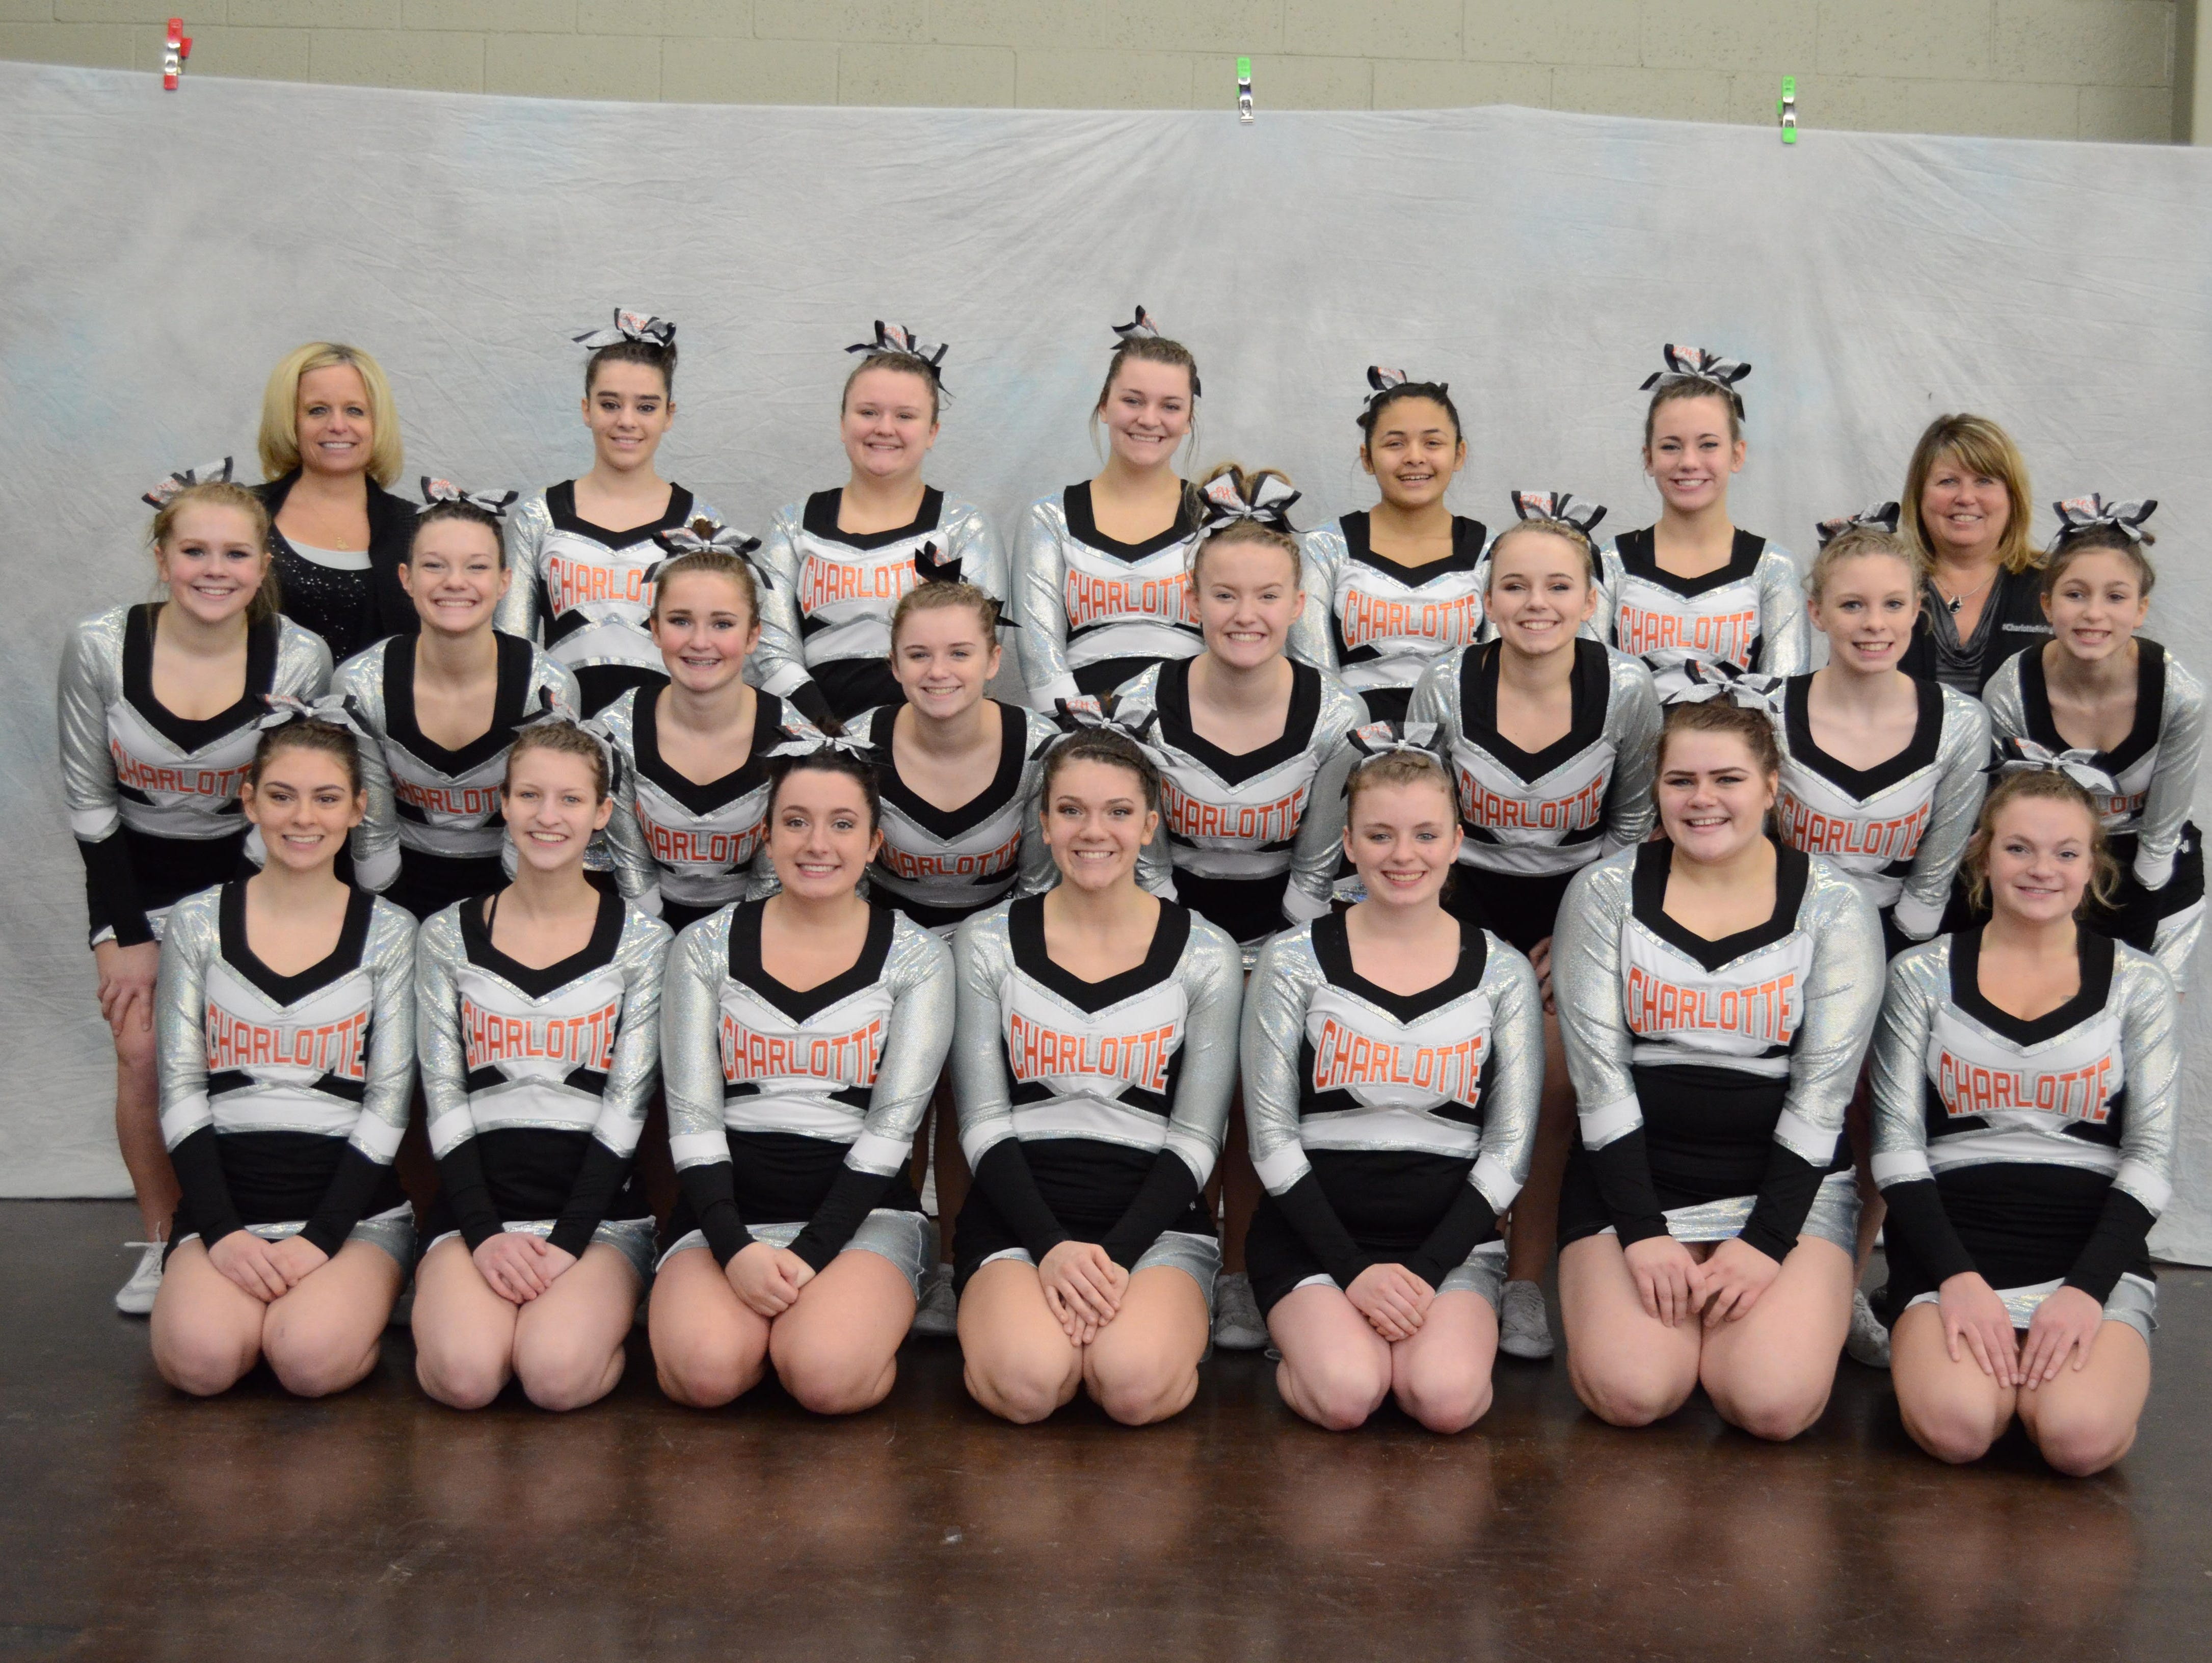 The Charlotte competitive cheer team had a historic season that ended with a sixth-place finish at the state finals.